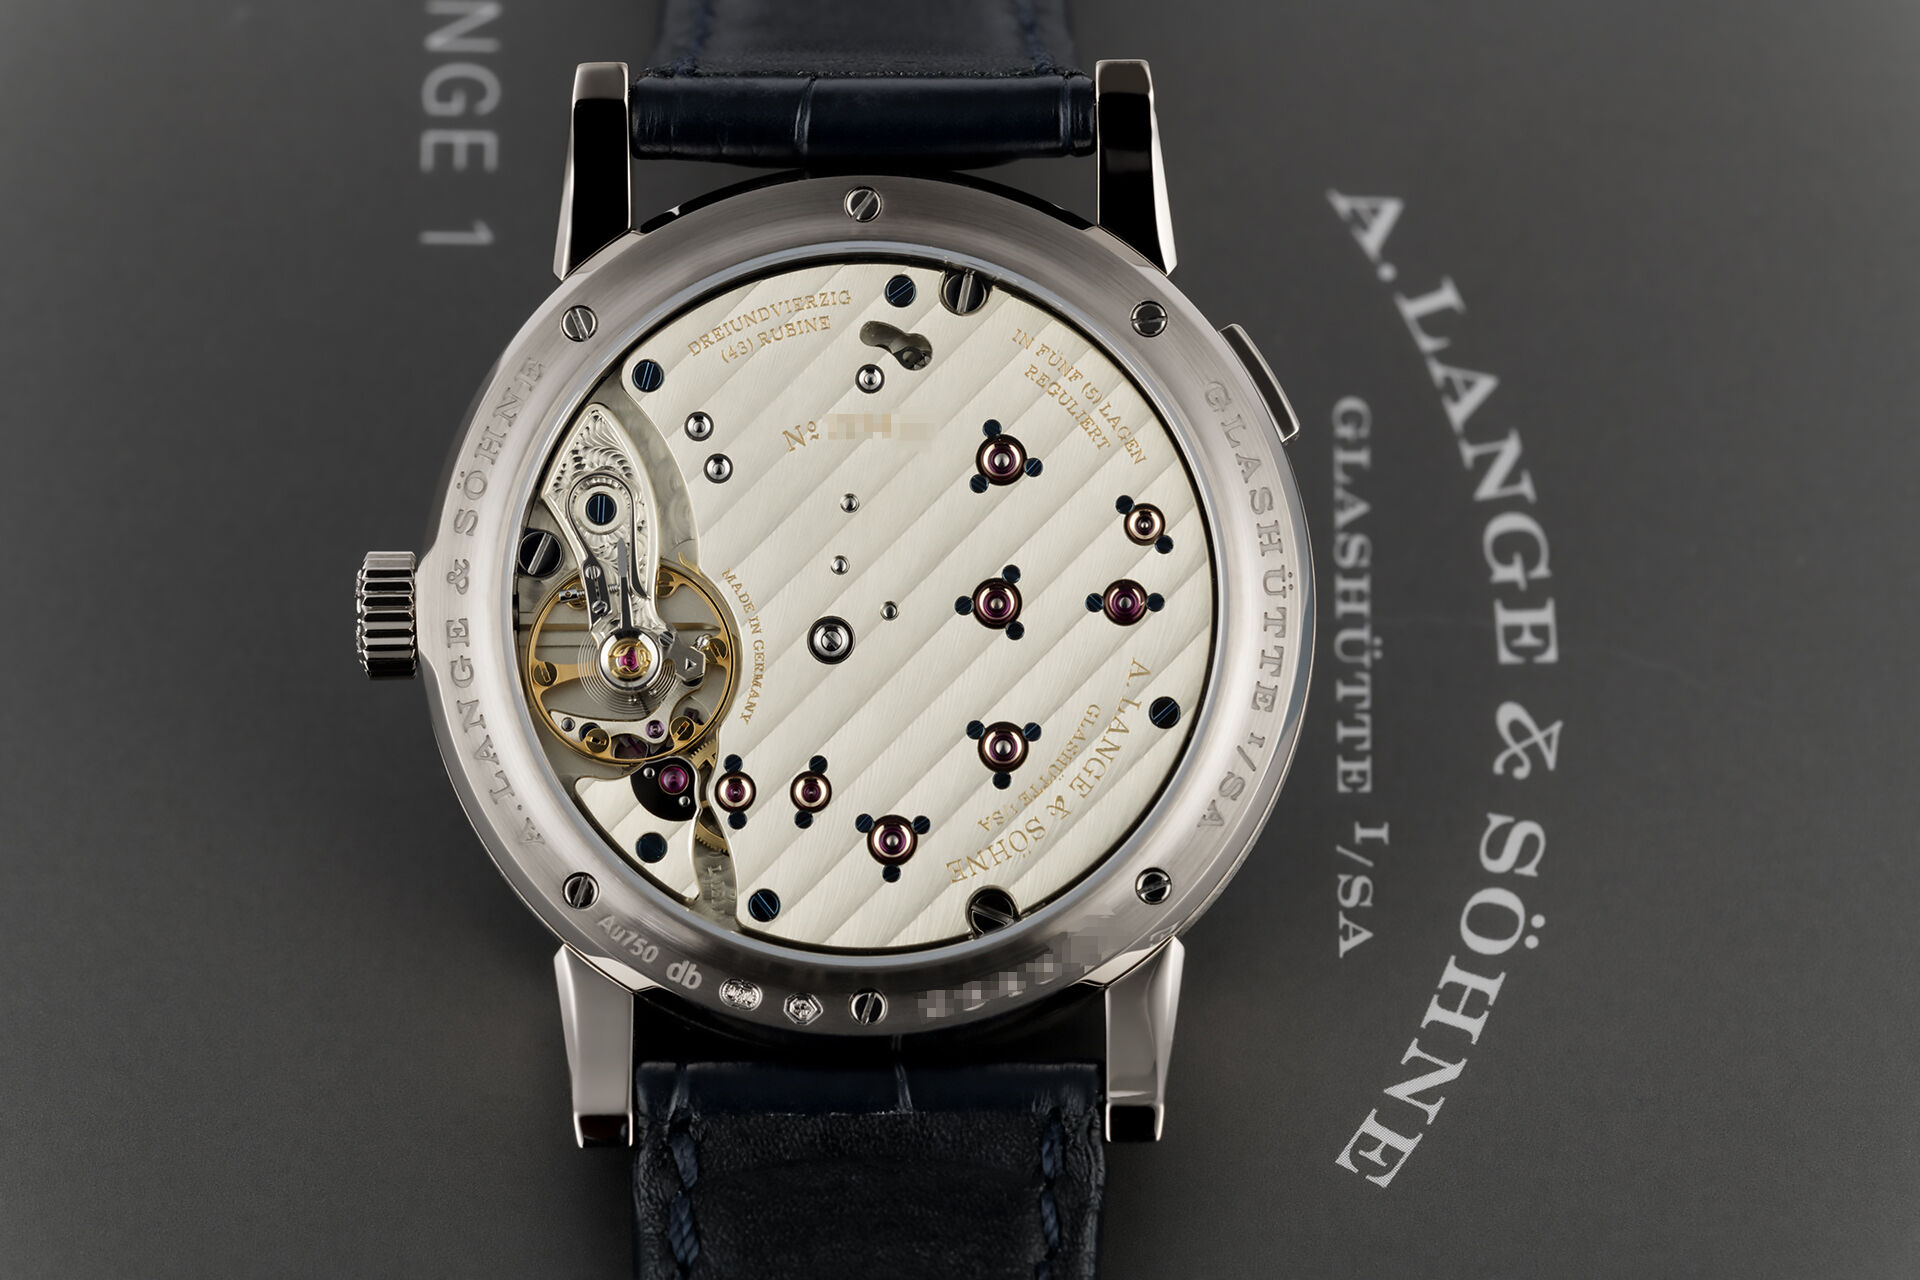 ref 191.028 | Only Made For 1 Year  | A. Lange & Söhne Lange 1